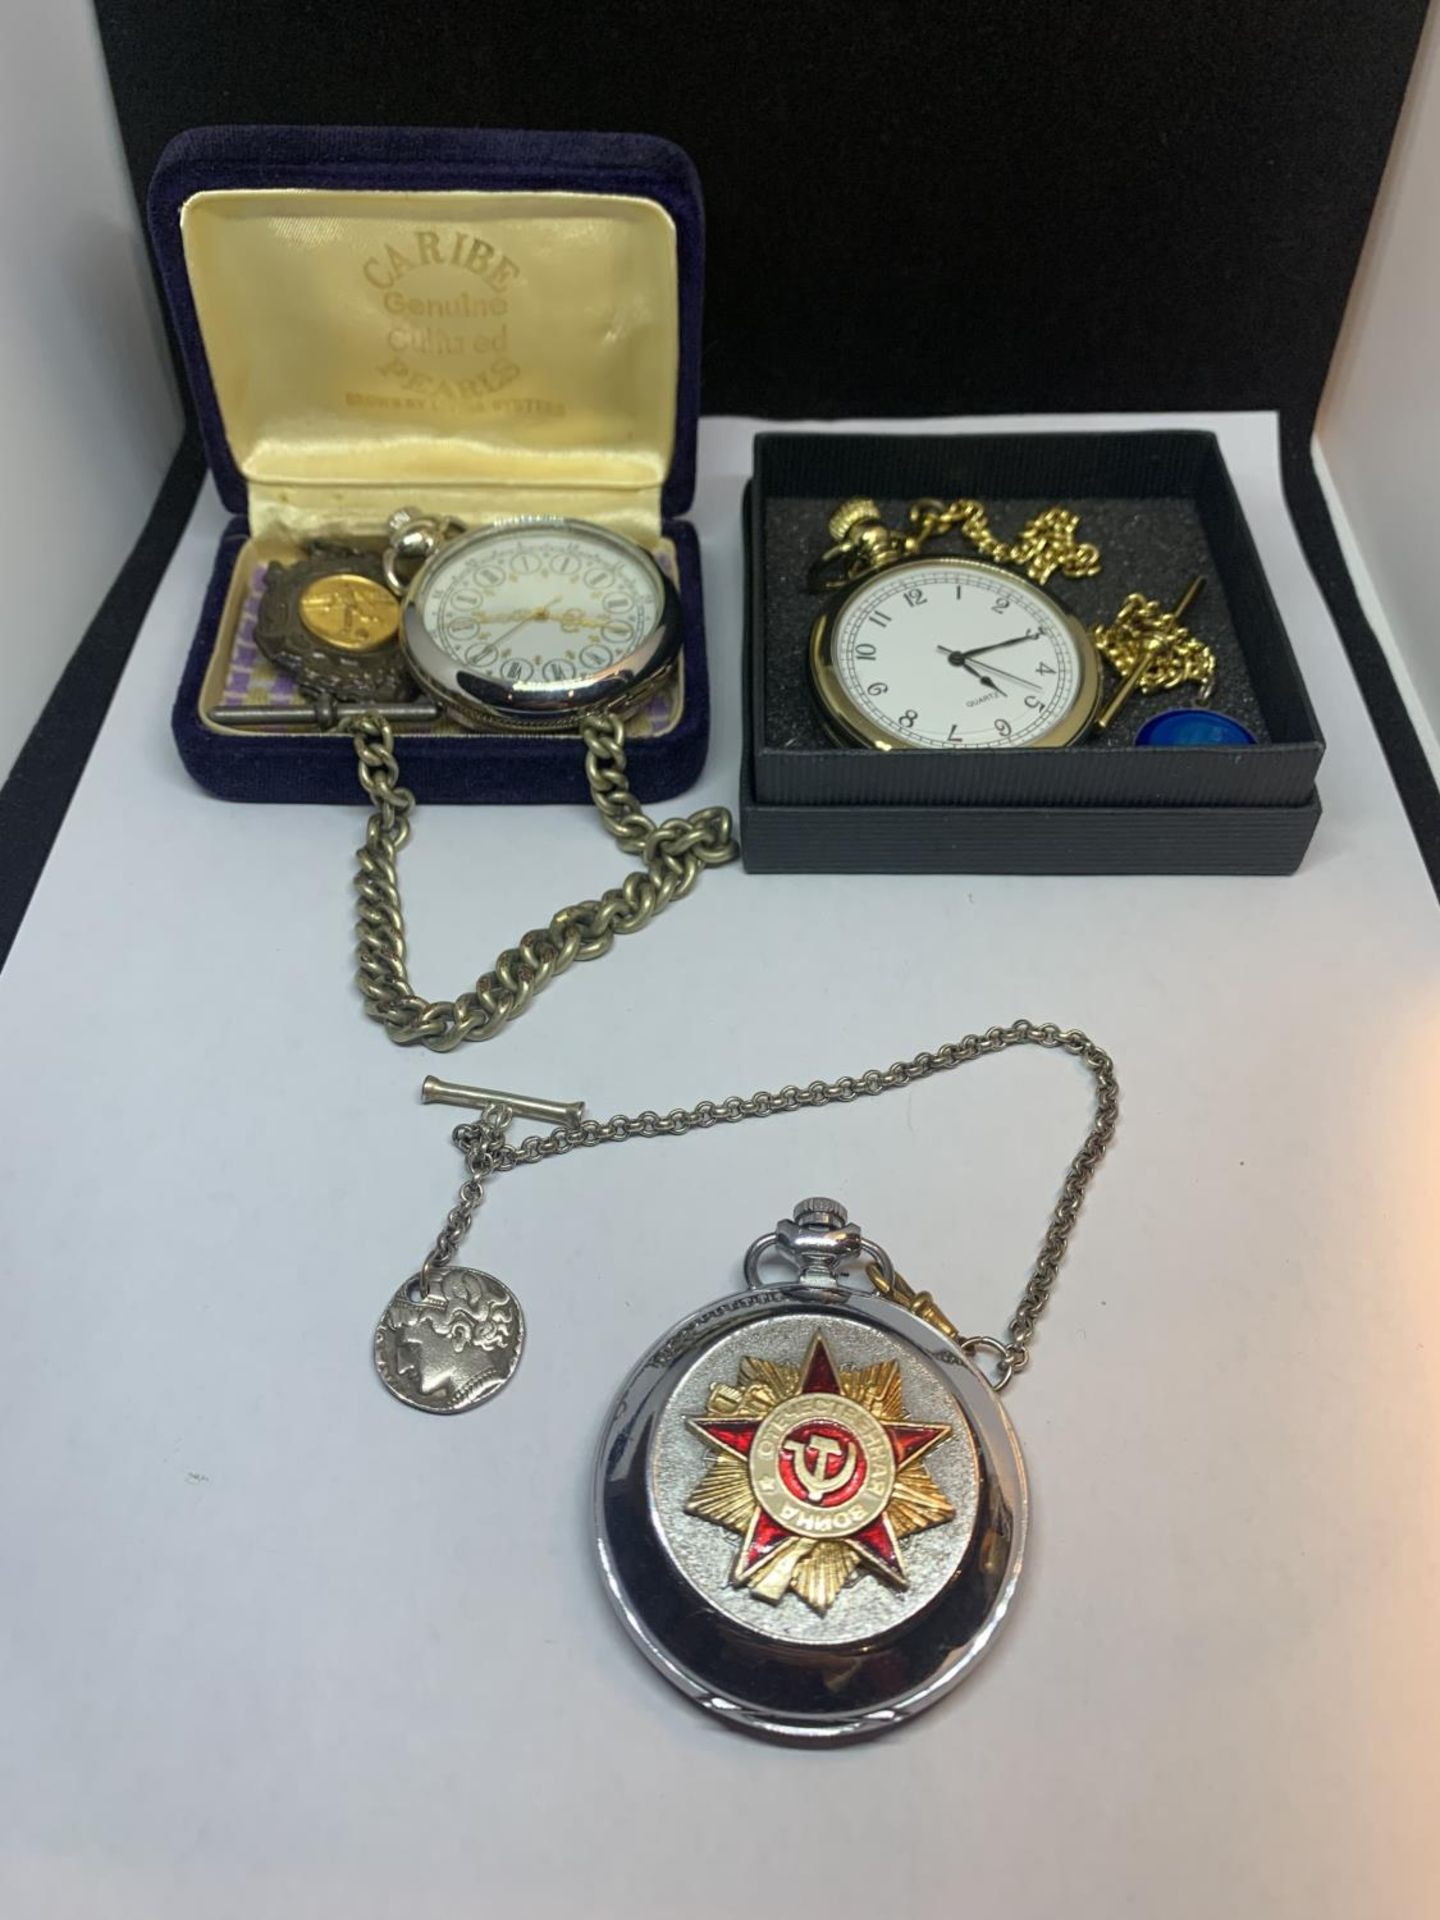 THREE VARIOUS POCKETS WATCHES - ONE WITH CHAIN AND FOOTBALL MEDAL FOB, ONE WITH CHAIN AND ST